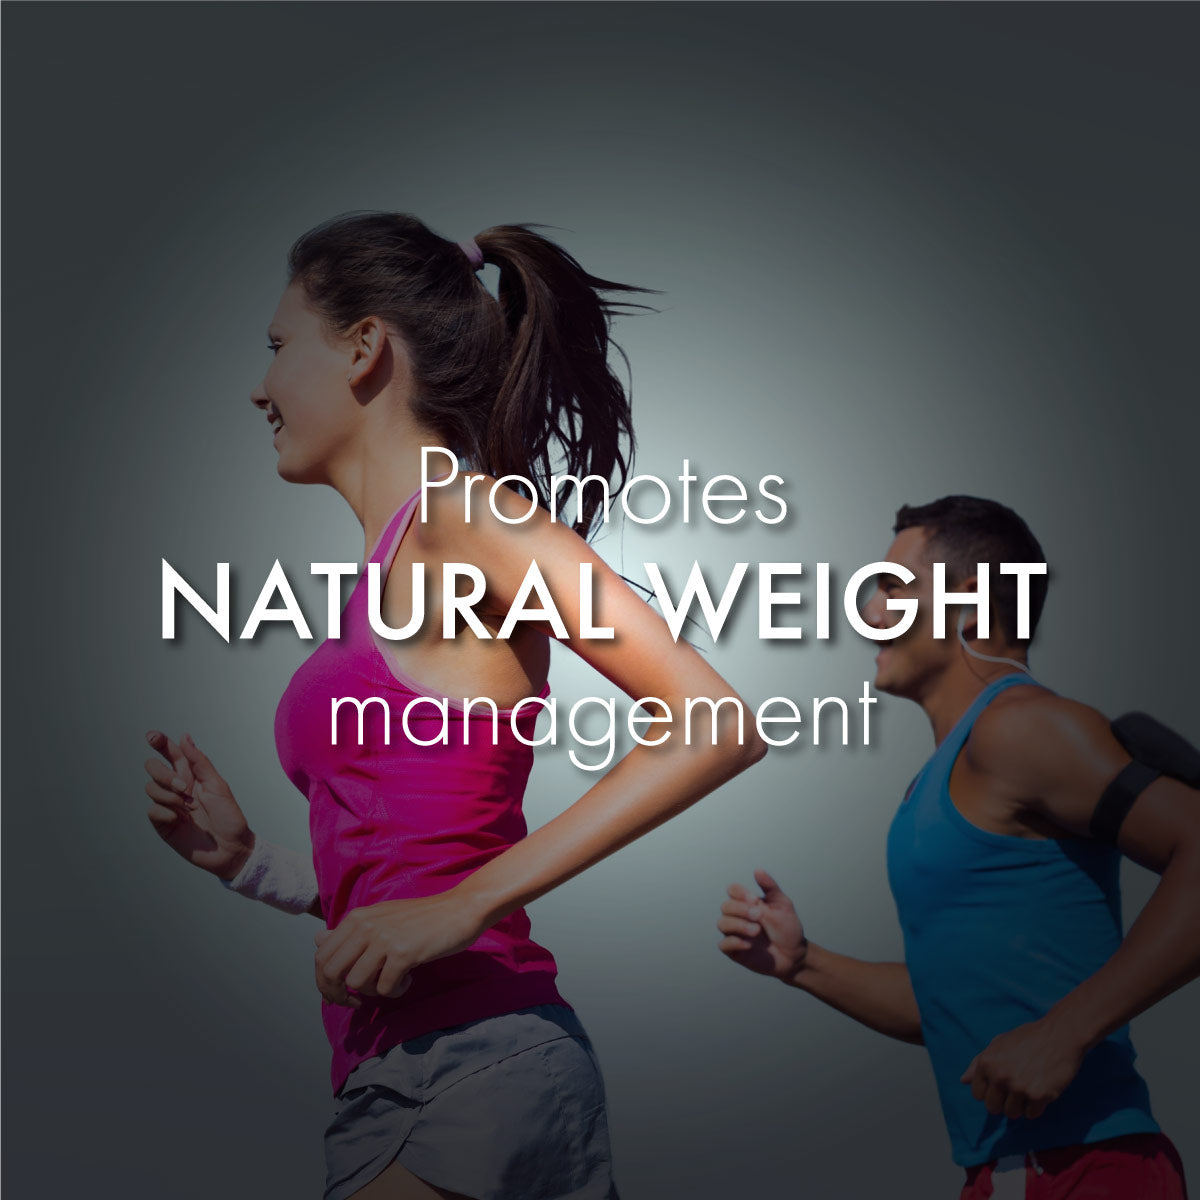 Weight Management Pack: For Natural & Effective Weight Management